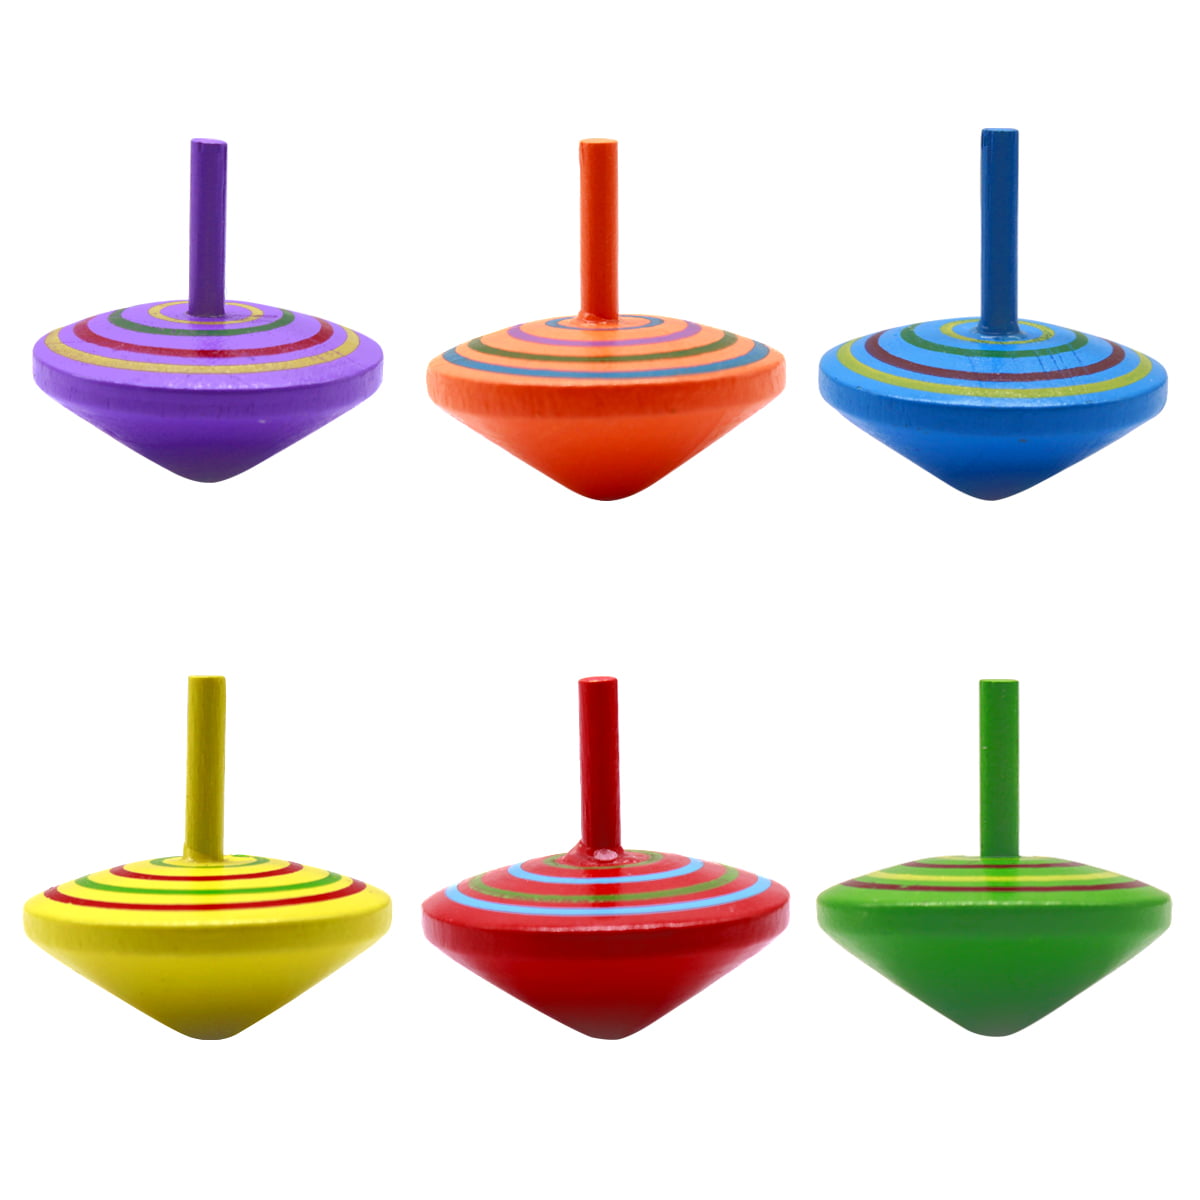 Colorful Wooden Spinning Top Safe Non-toxic Wood Toy For Kids Children 18 Pcs 